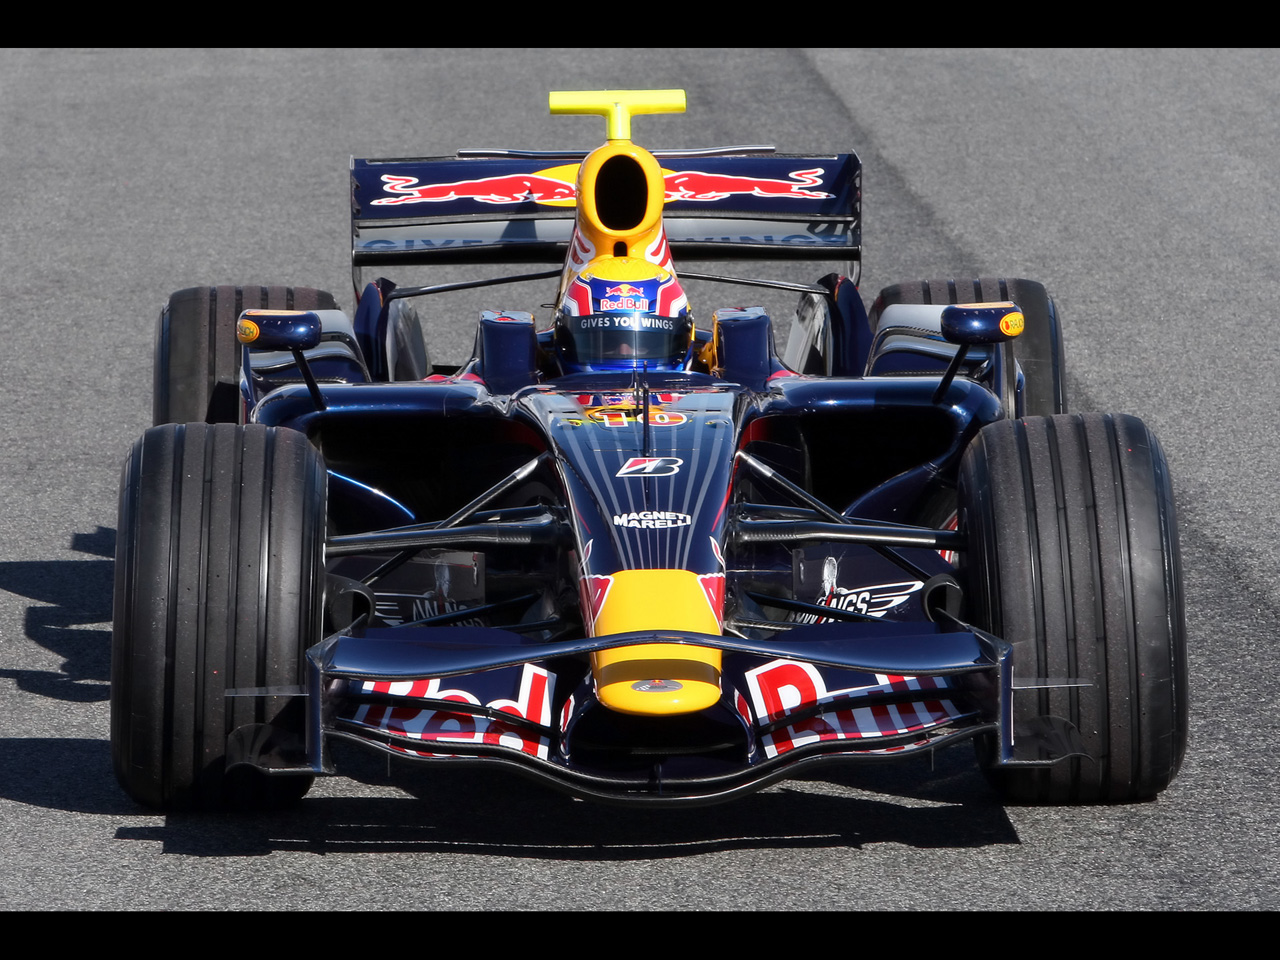 red-bull-rb4-view-download-wallpaper-1280x960-comments_e4317.jpg